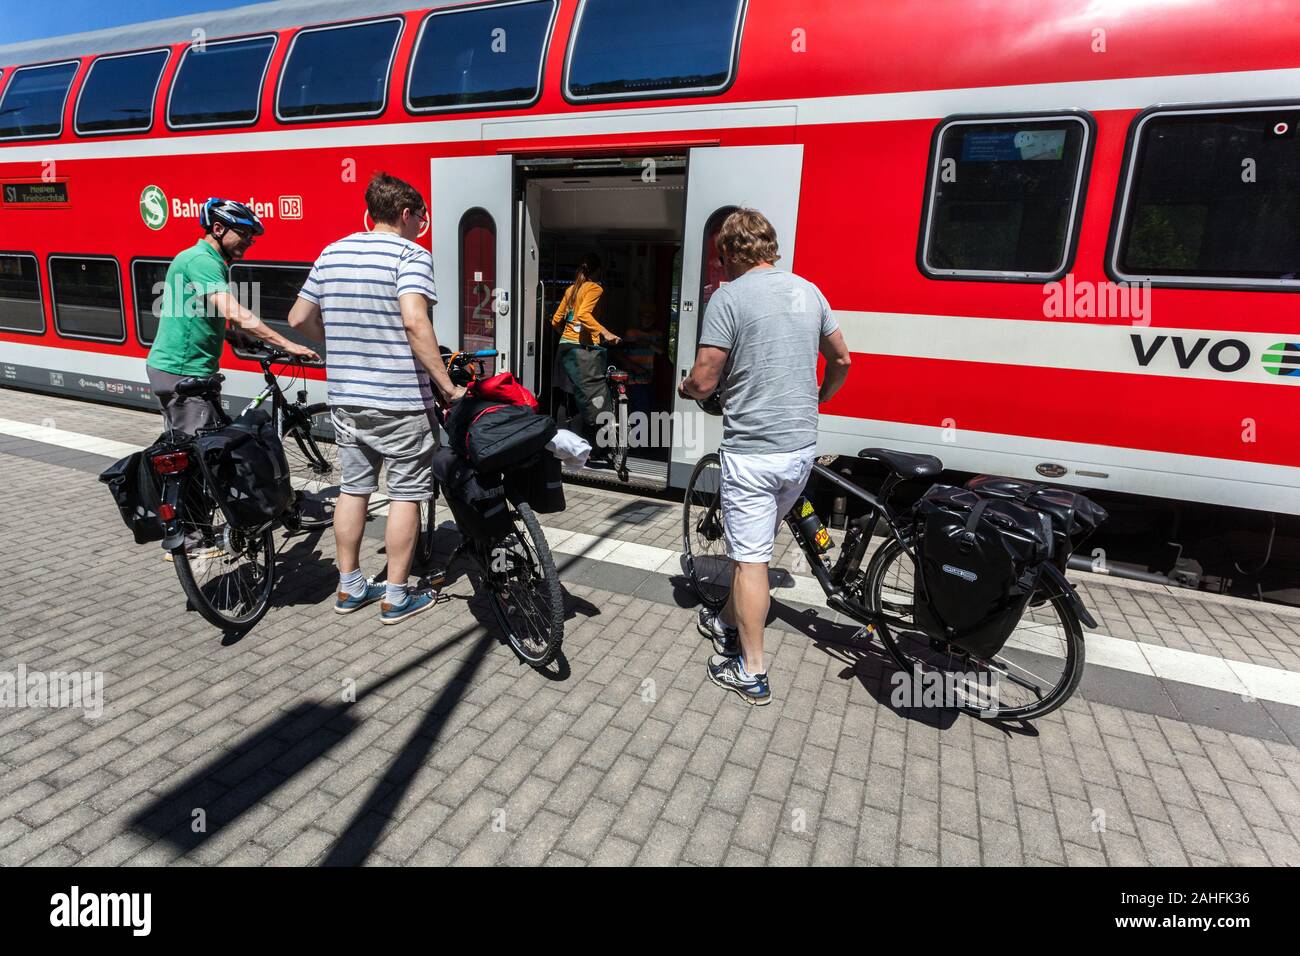 Germany bicycle trip by train, Group of people on  railway platform just get on  Regional Train Deutsche Bahn Saxony Germany Commuter train Stock Photo